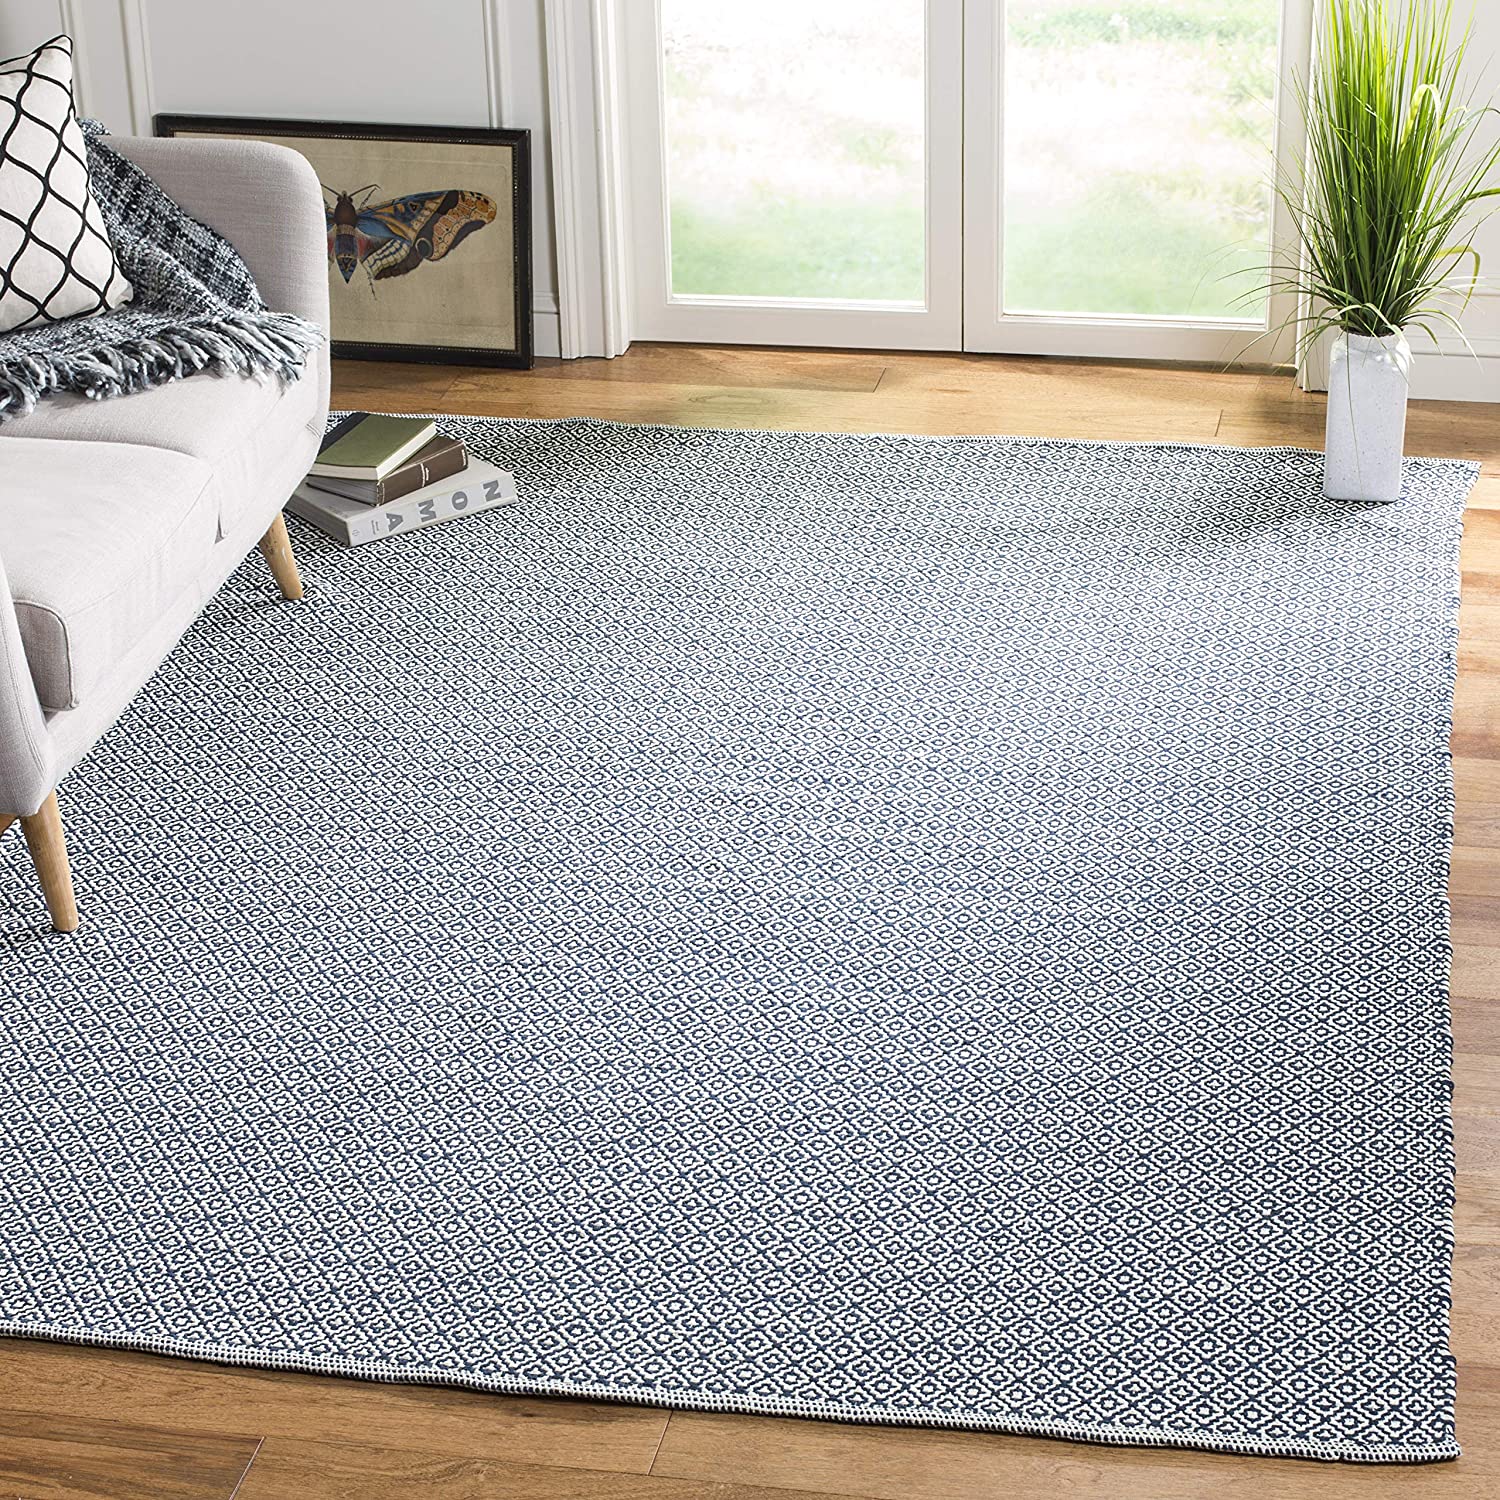 Montauk Collection Hand-Woven Cotton Area Rug, 5’ x8’ , Navy/Ivory #116R